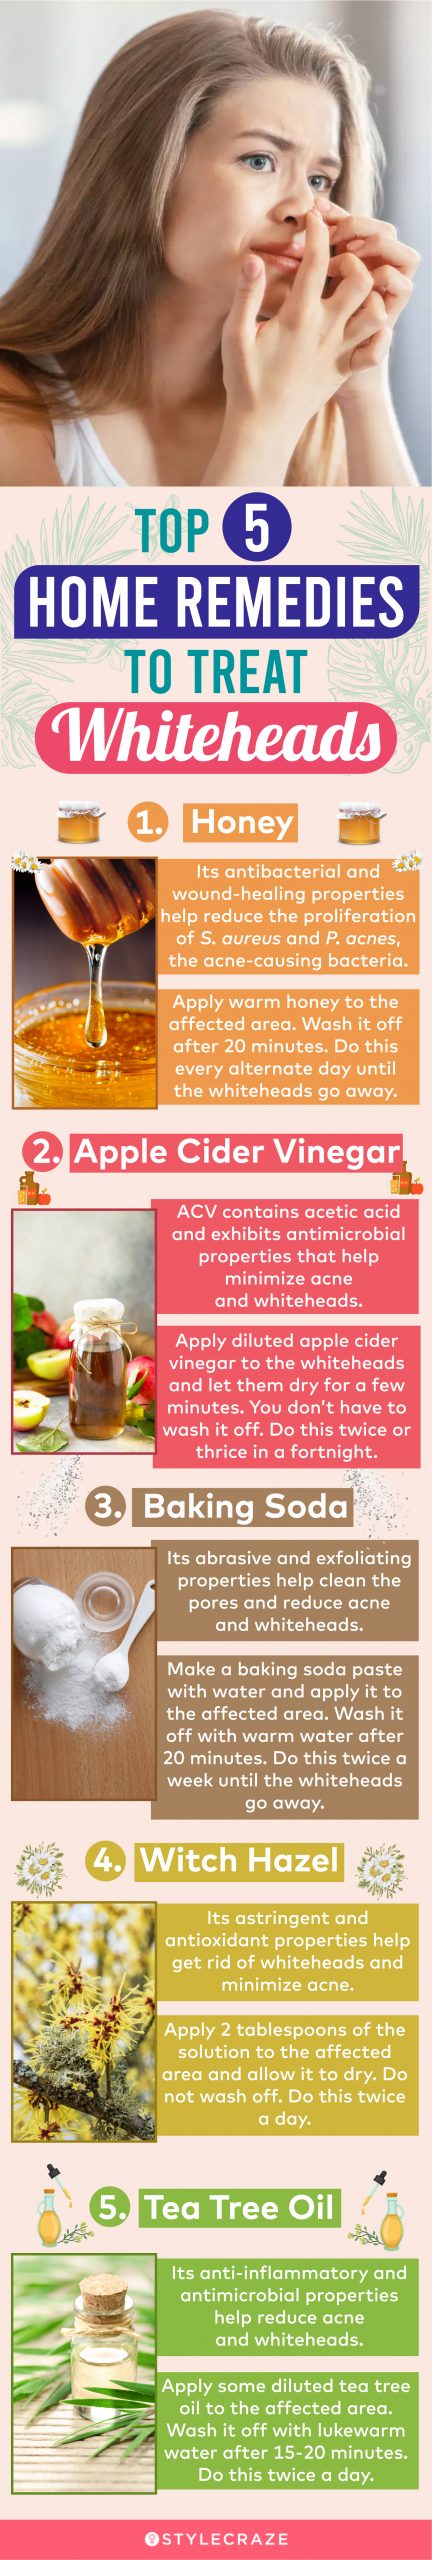 top 5 home remedies to treat whiteheads (infographic)